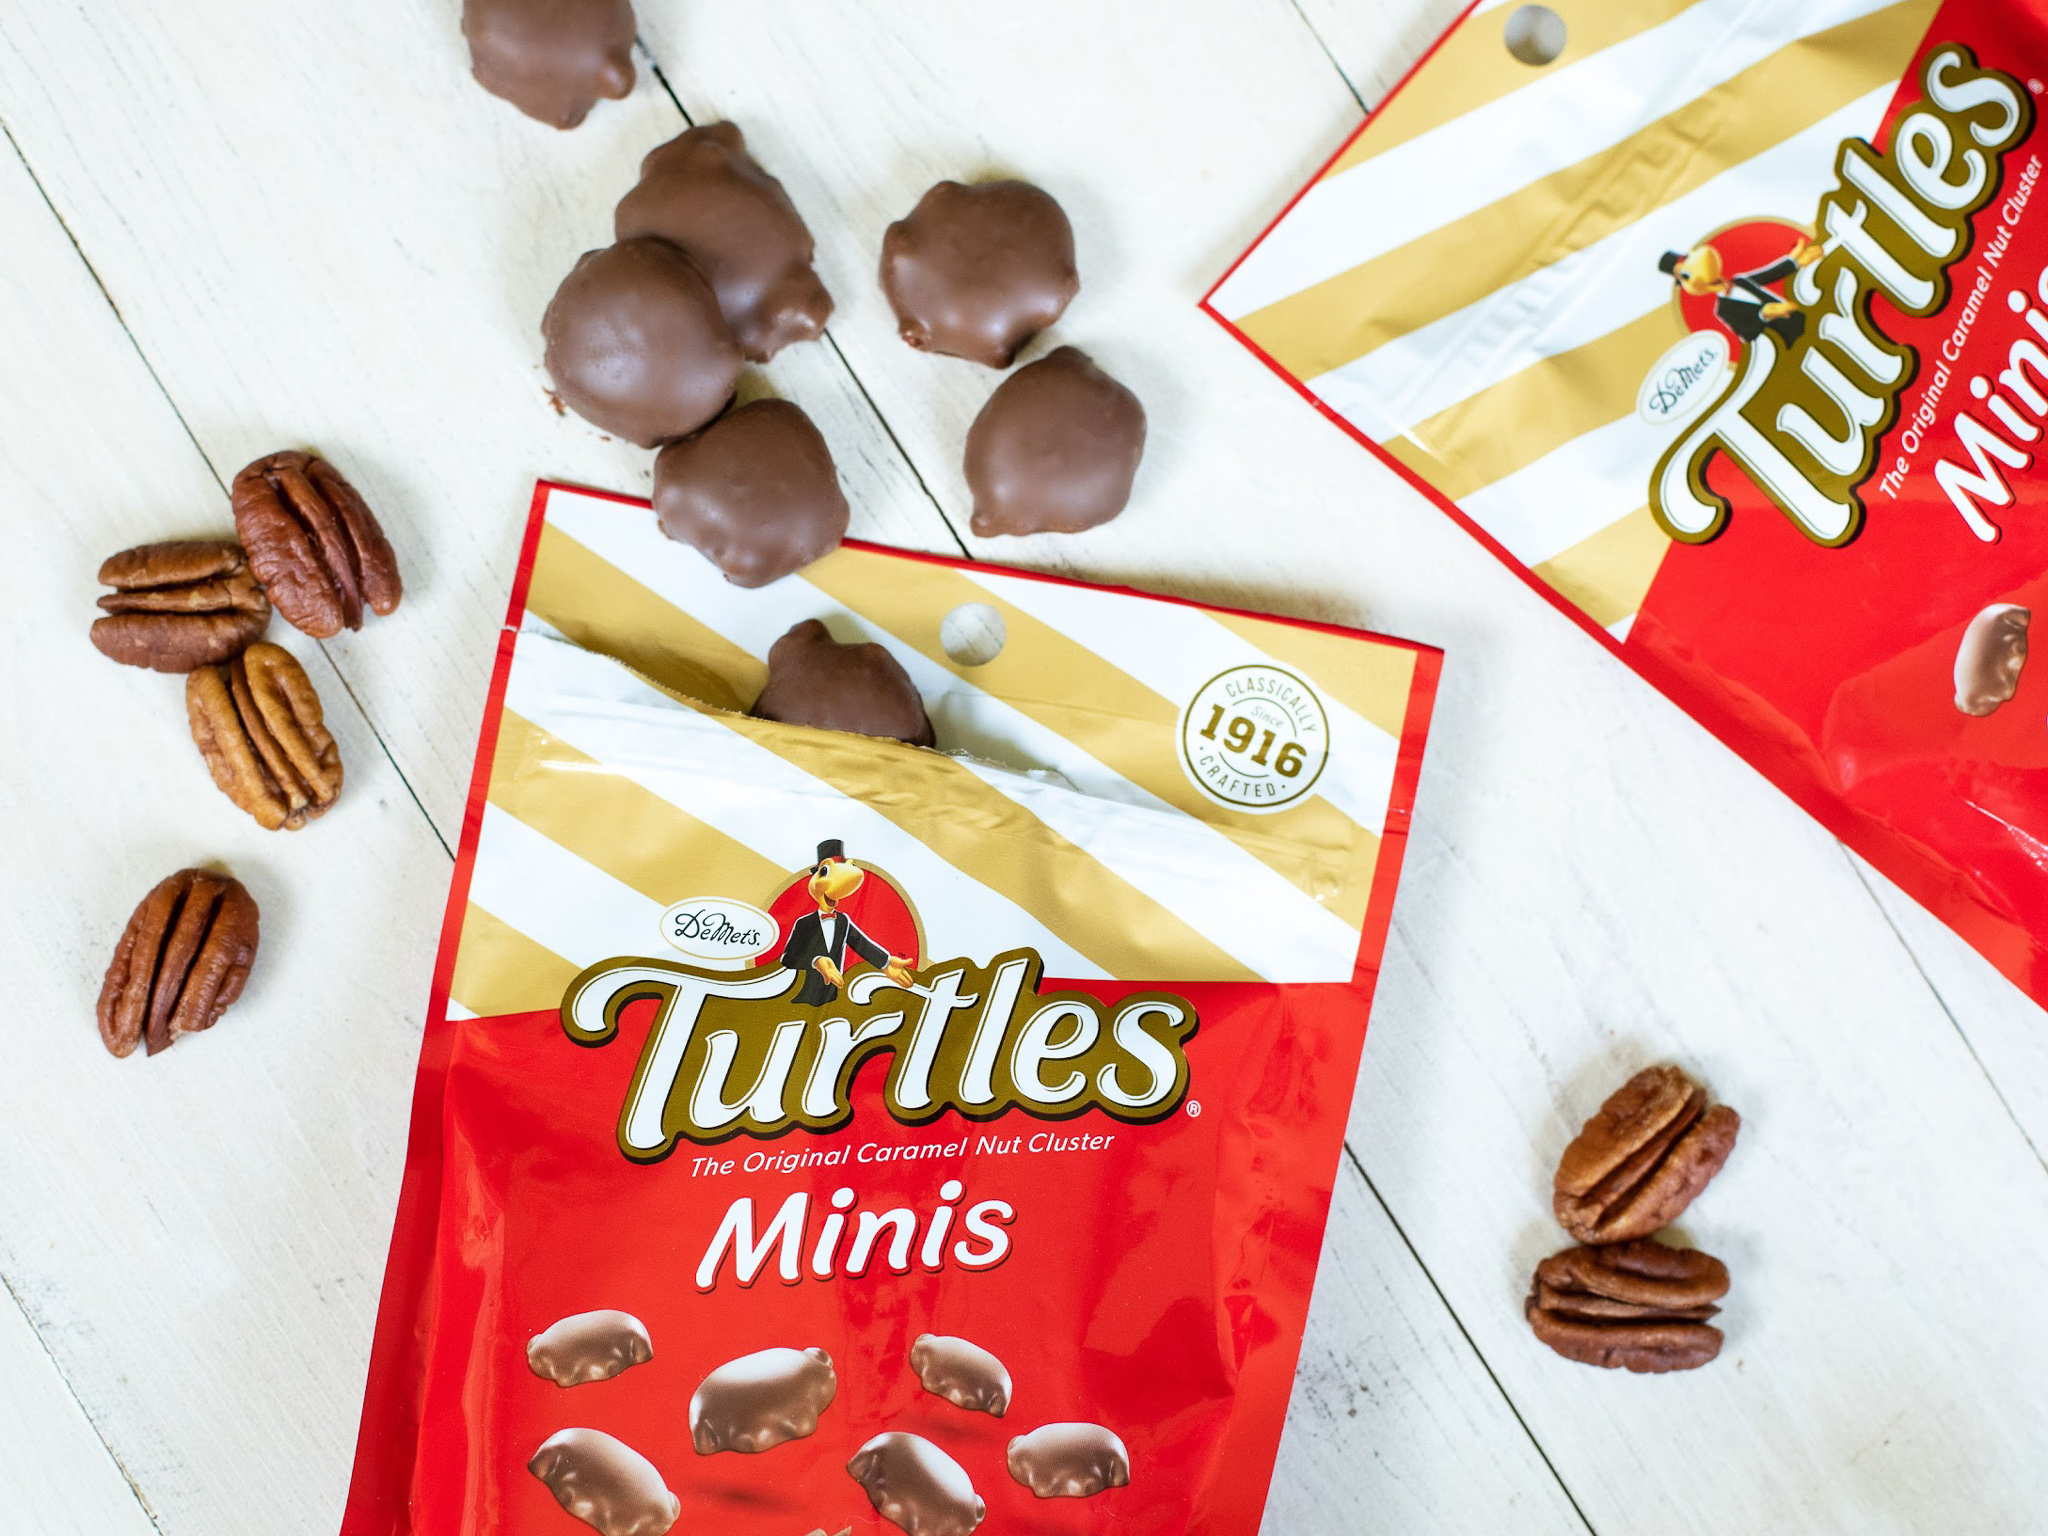 Turtles® Minis Are Now Available At Publix - Clip Your Coupon & Save On A Delicious Treat on I Heart Publix 1